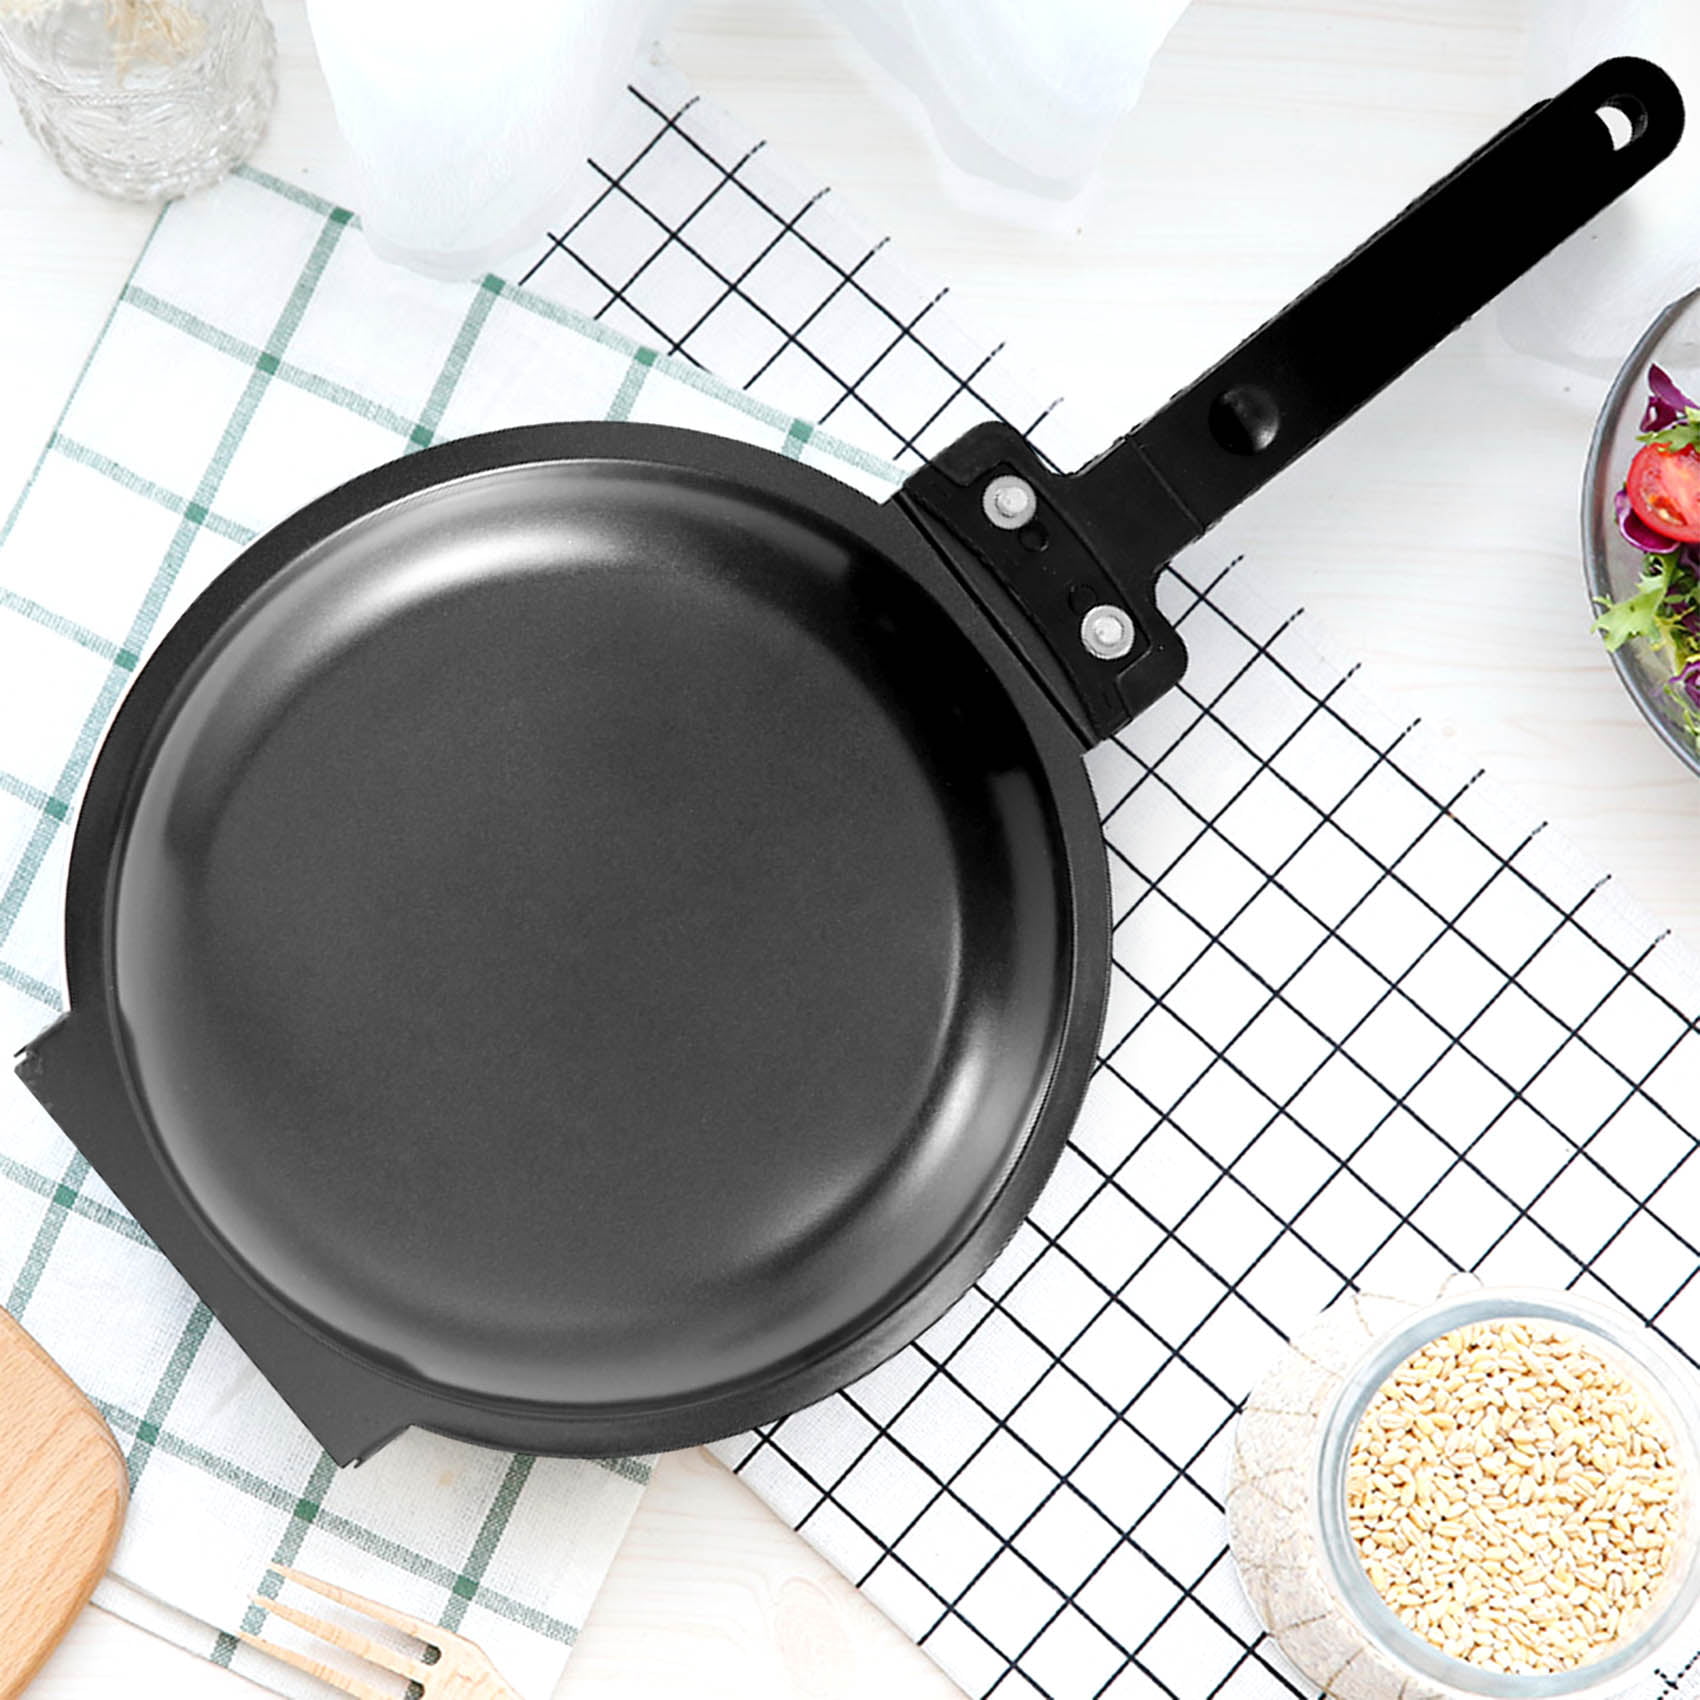 Killer's Instinct Outdoors 1 PCS Double-sided Frying Pan-Non-stick,  Easy-to-clean Double-sided Frying Pan with Double-sided Flip Design